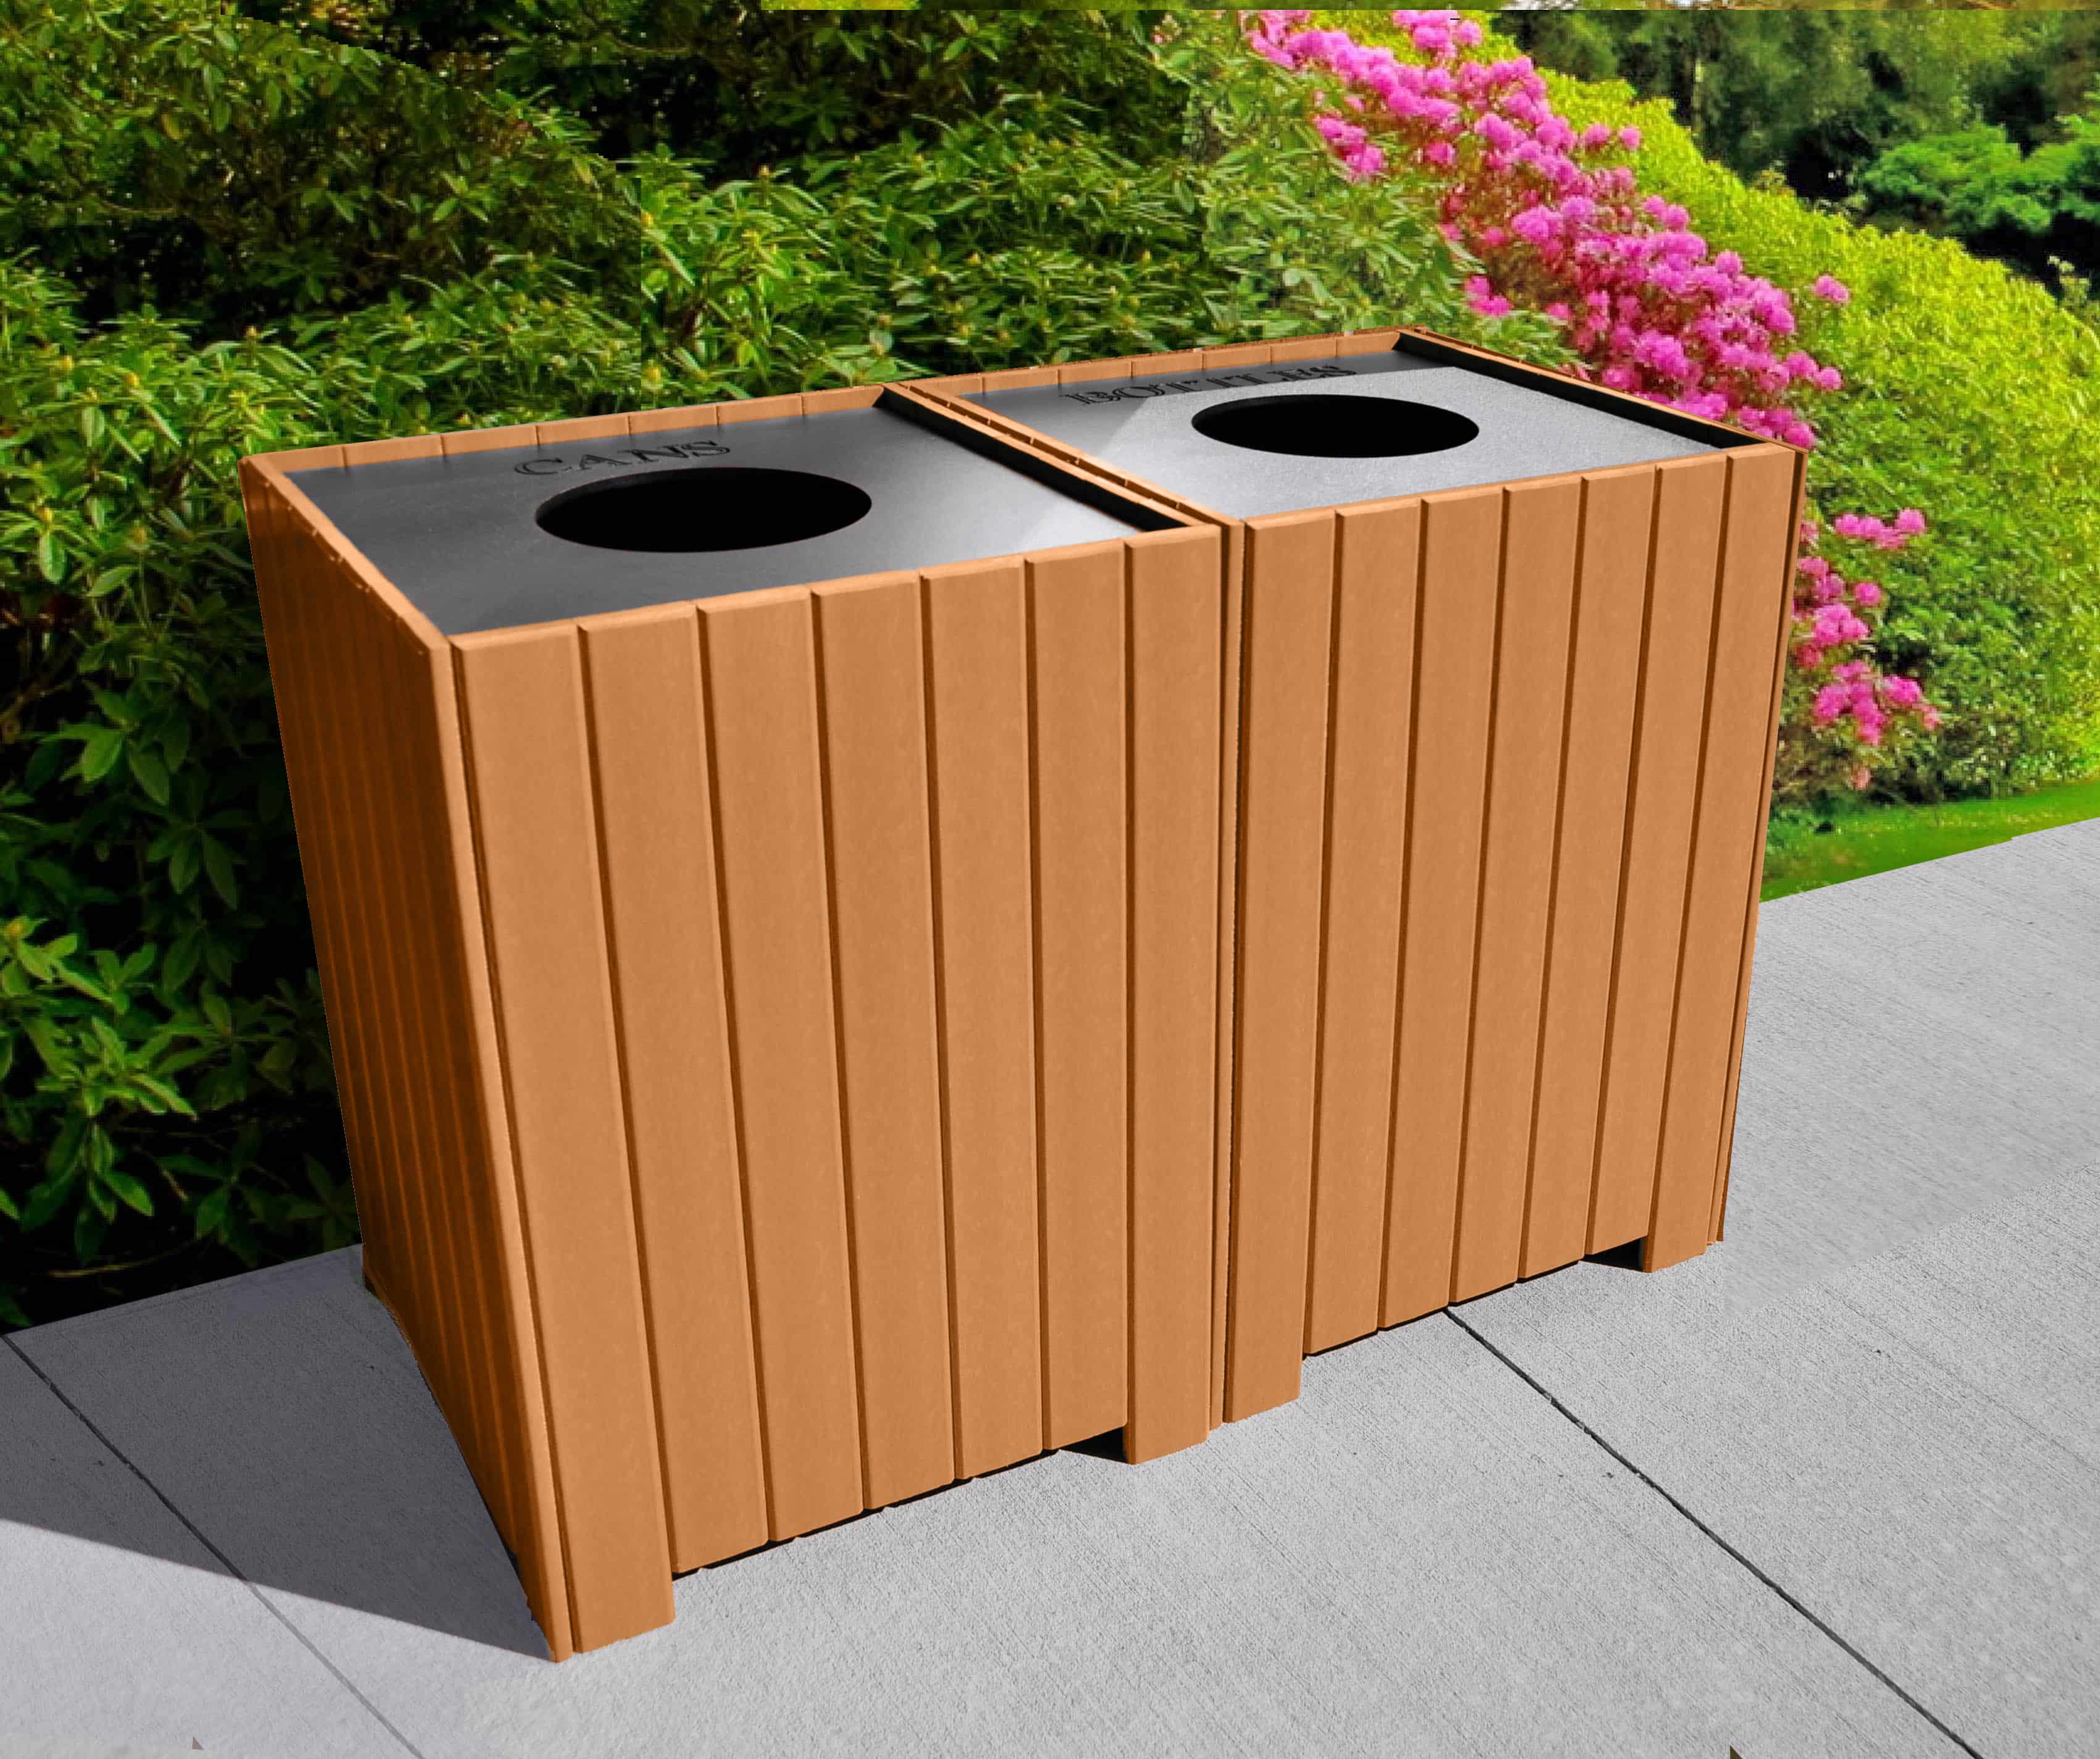 Teak Recycling and Trash